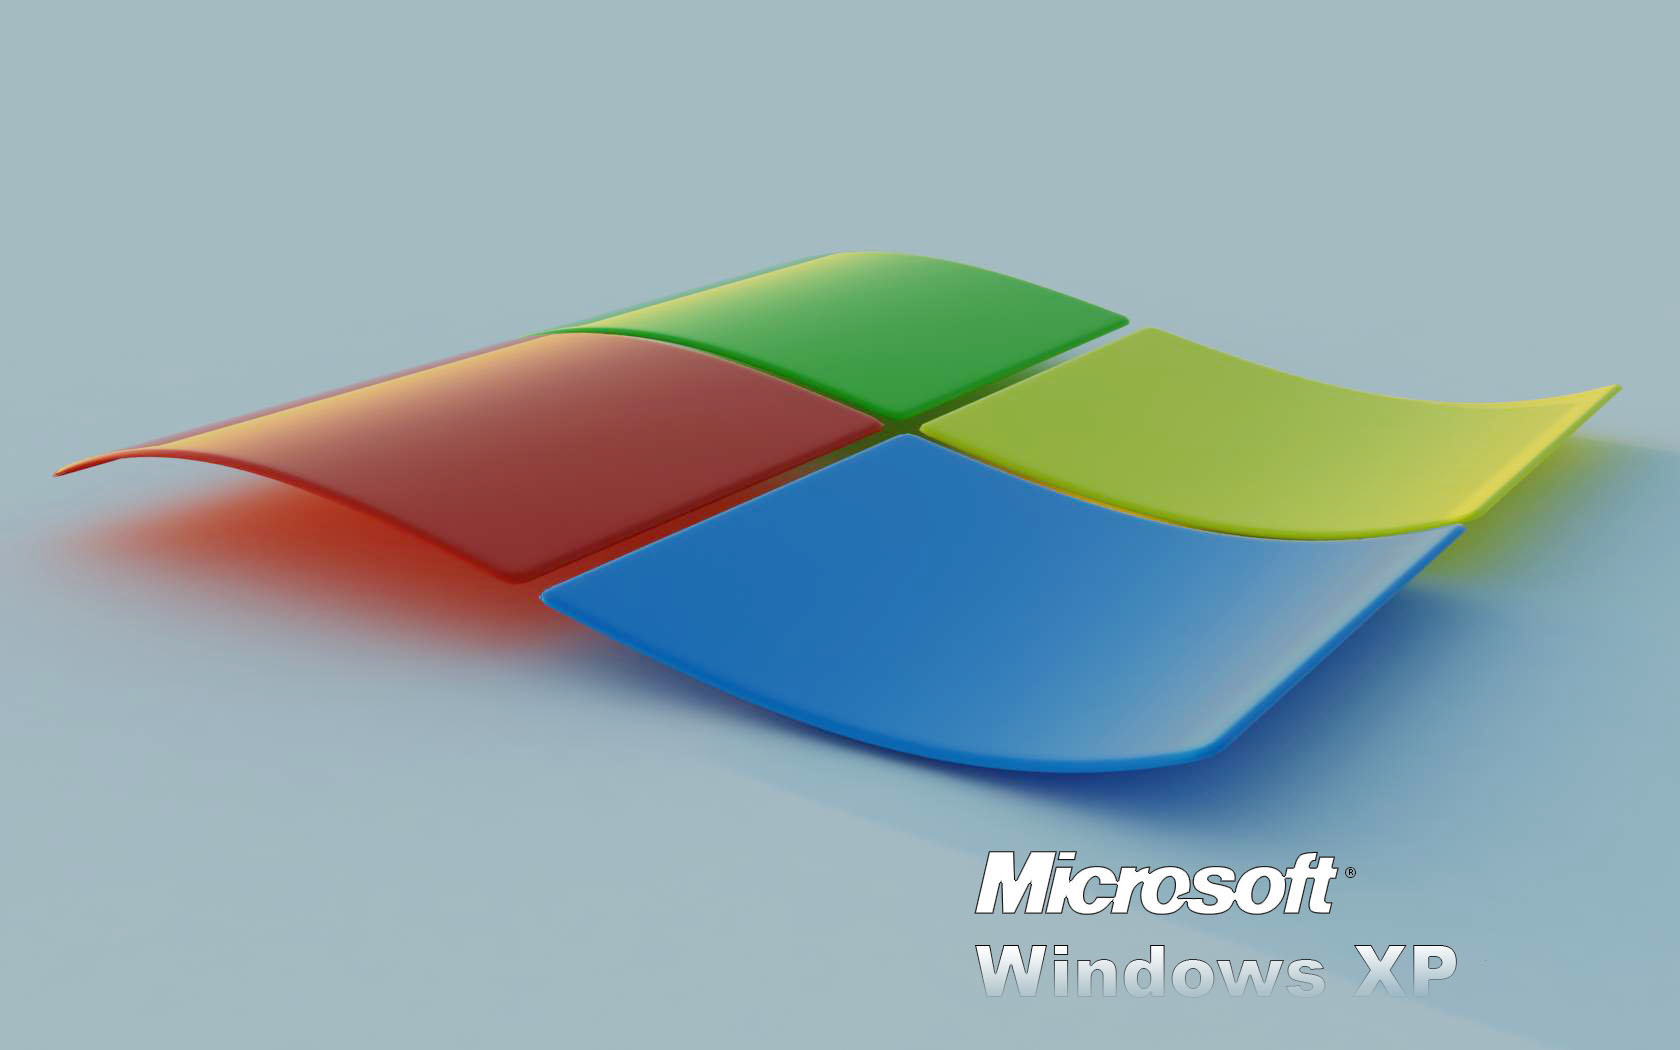 Windows wallpaper, Wallpaper XP - Made with 3ds max + Vray + Photoshop